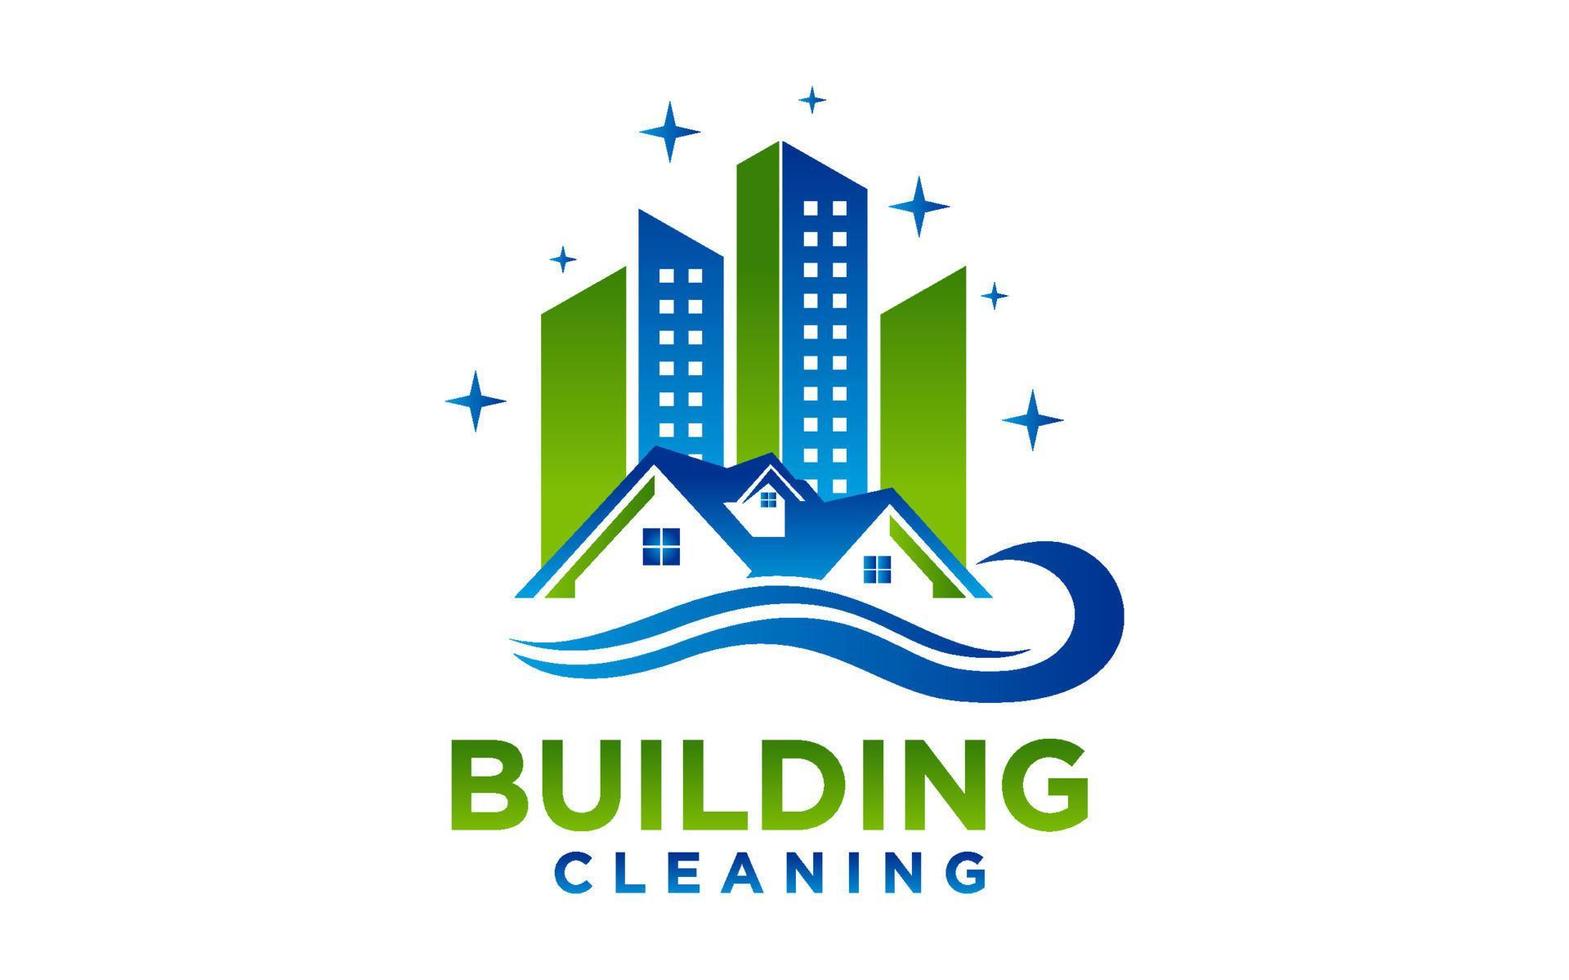 Home Building Cleaning Services Logo Design Template vector